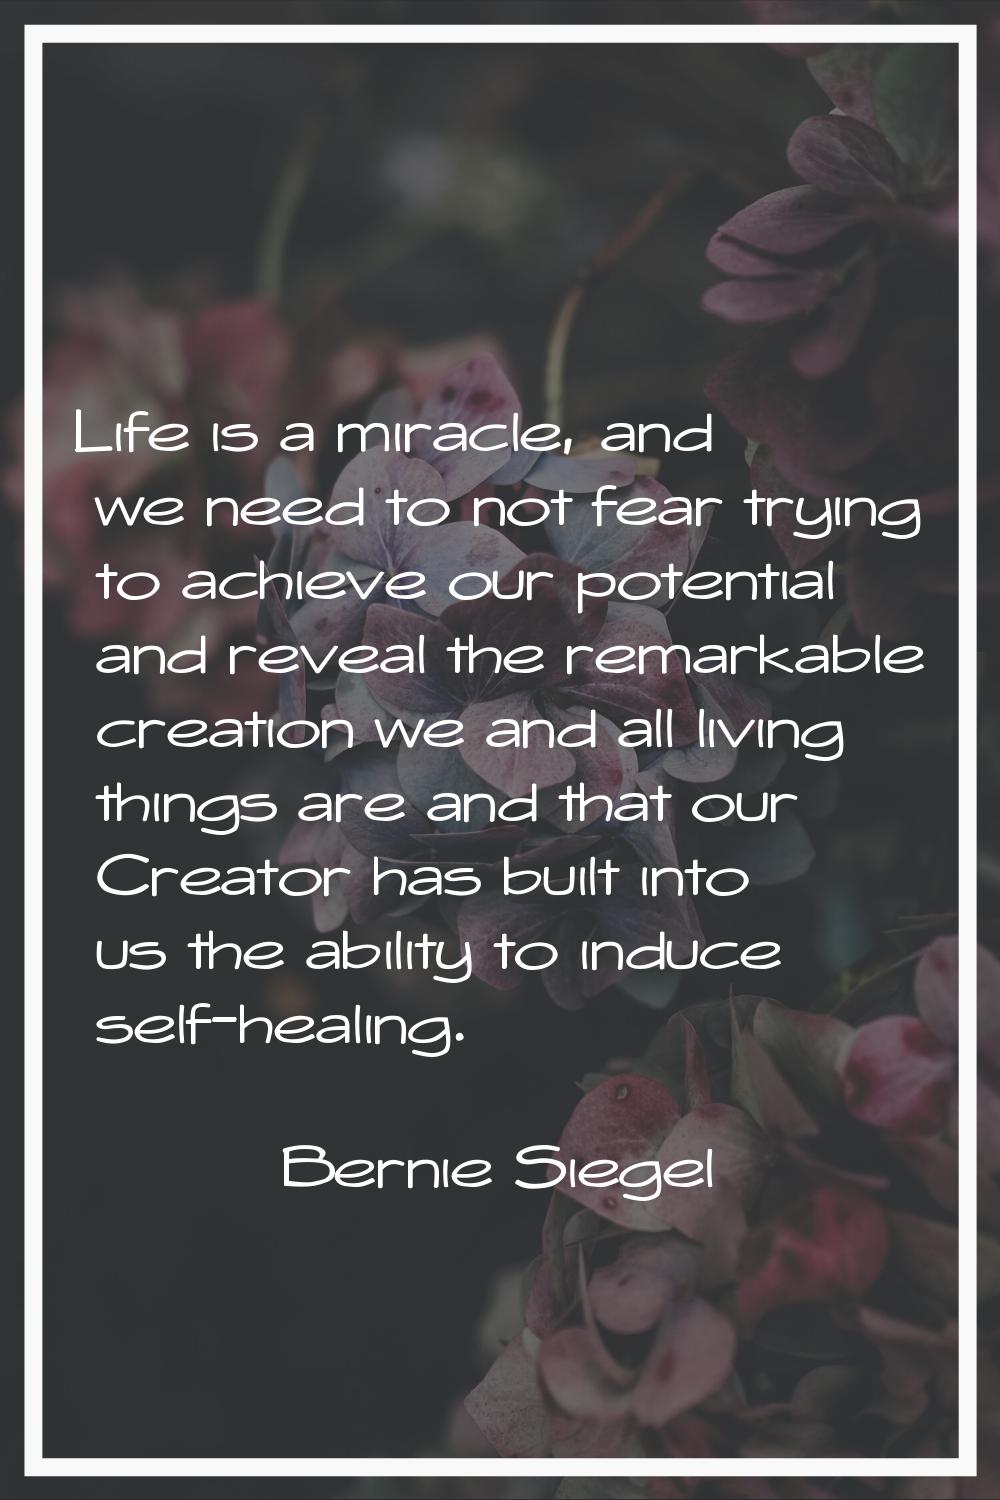 Life is a miracle, and we need to not fear trying to achieve our potential and reveal the remarkabl